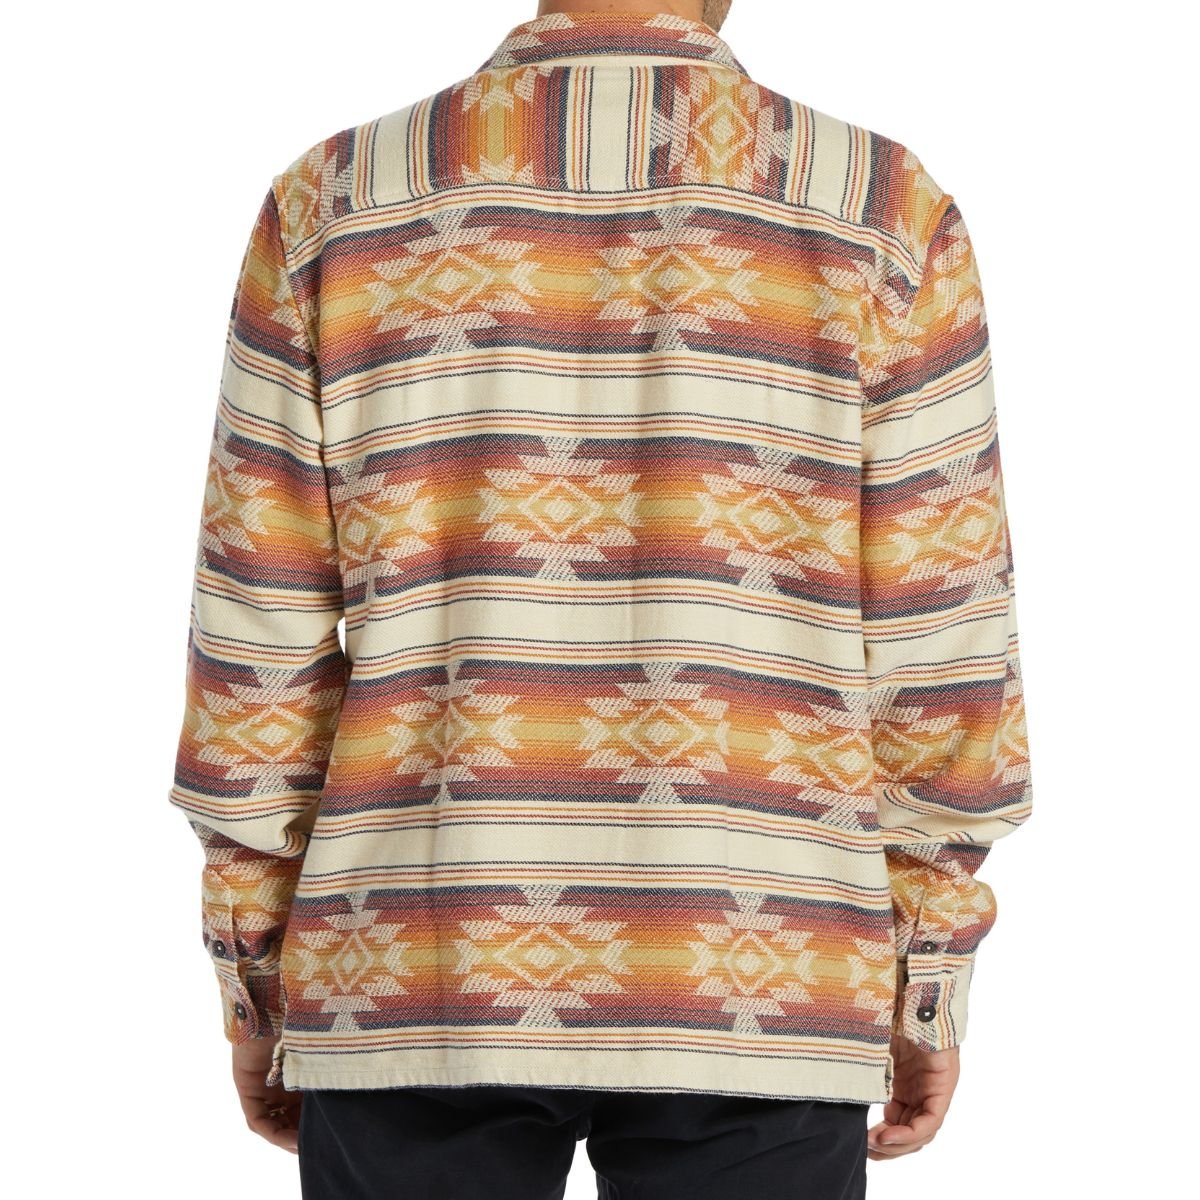 Billabong Offshore Jacquard Flannel Shirt in Gold - BoardCo